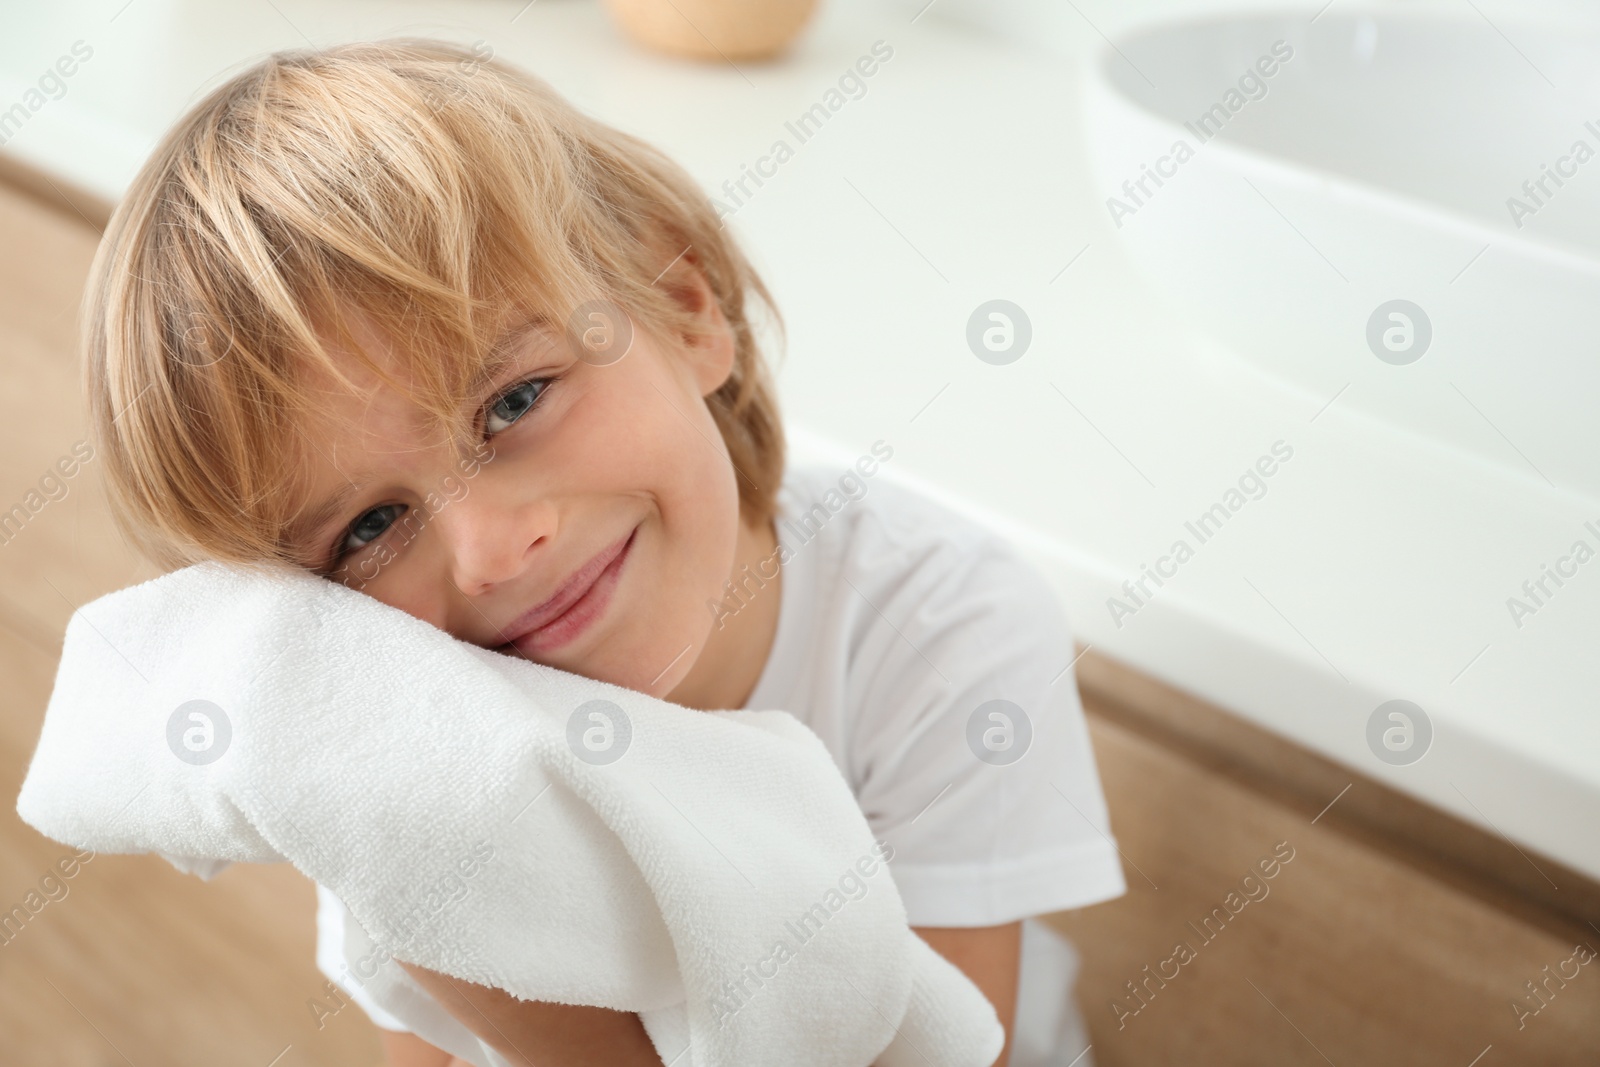 Photo of Cute little boy wiping face with towel in bathroom